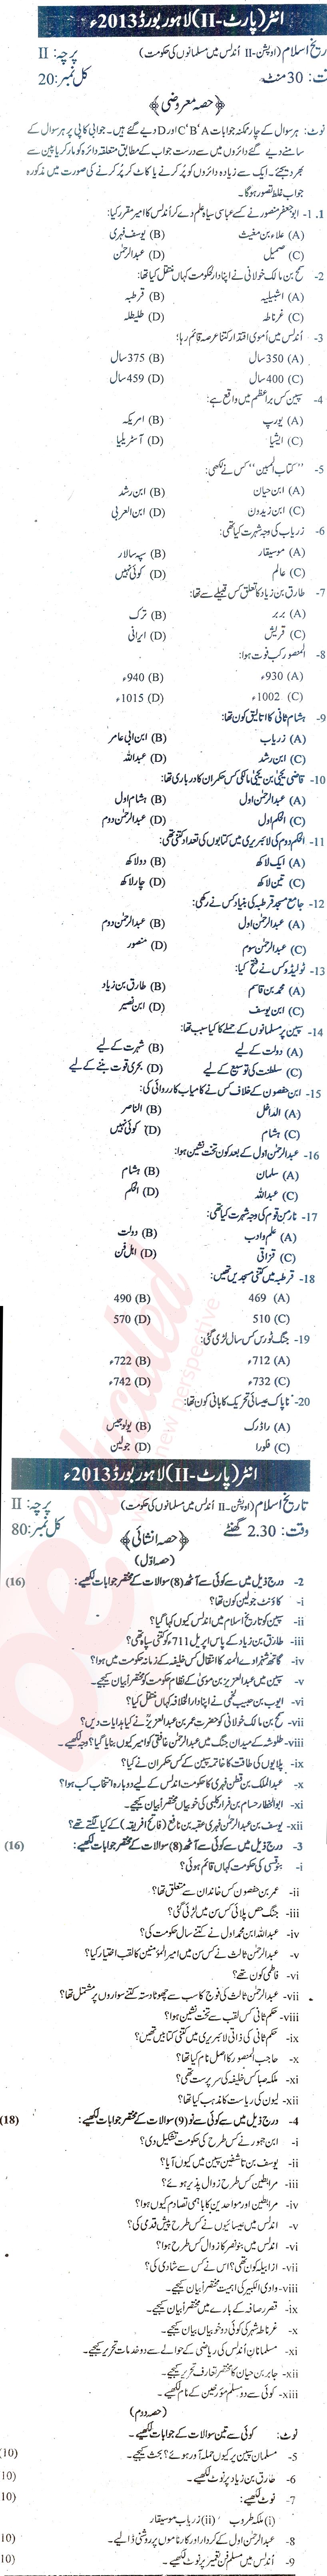 Islamic History FA Part 2 Past Paper Group 2 BISE Lahore 2013